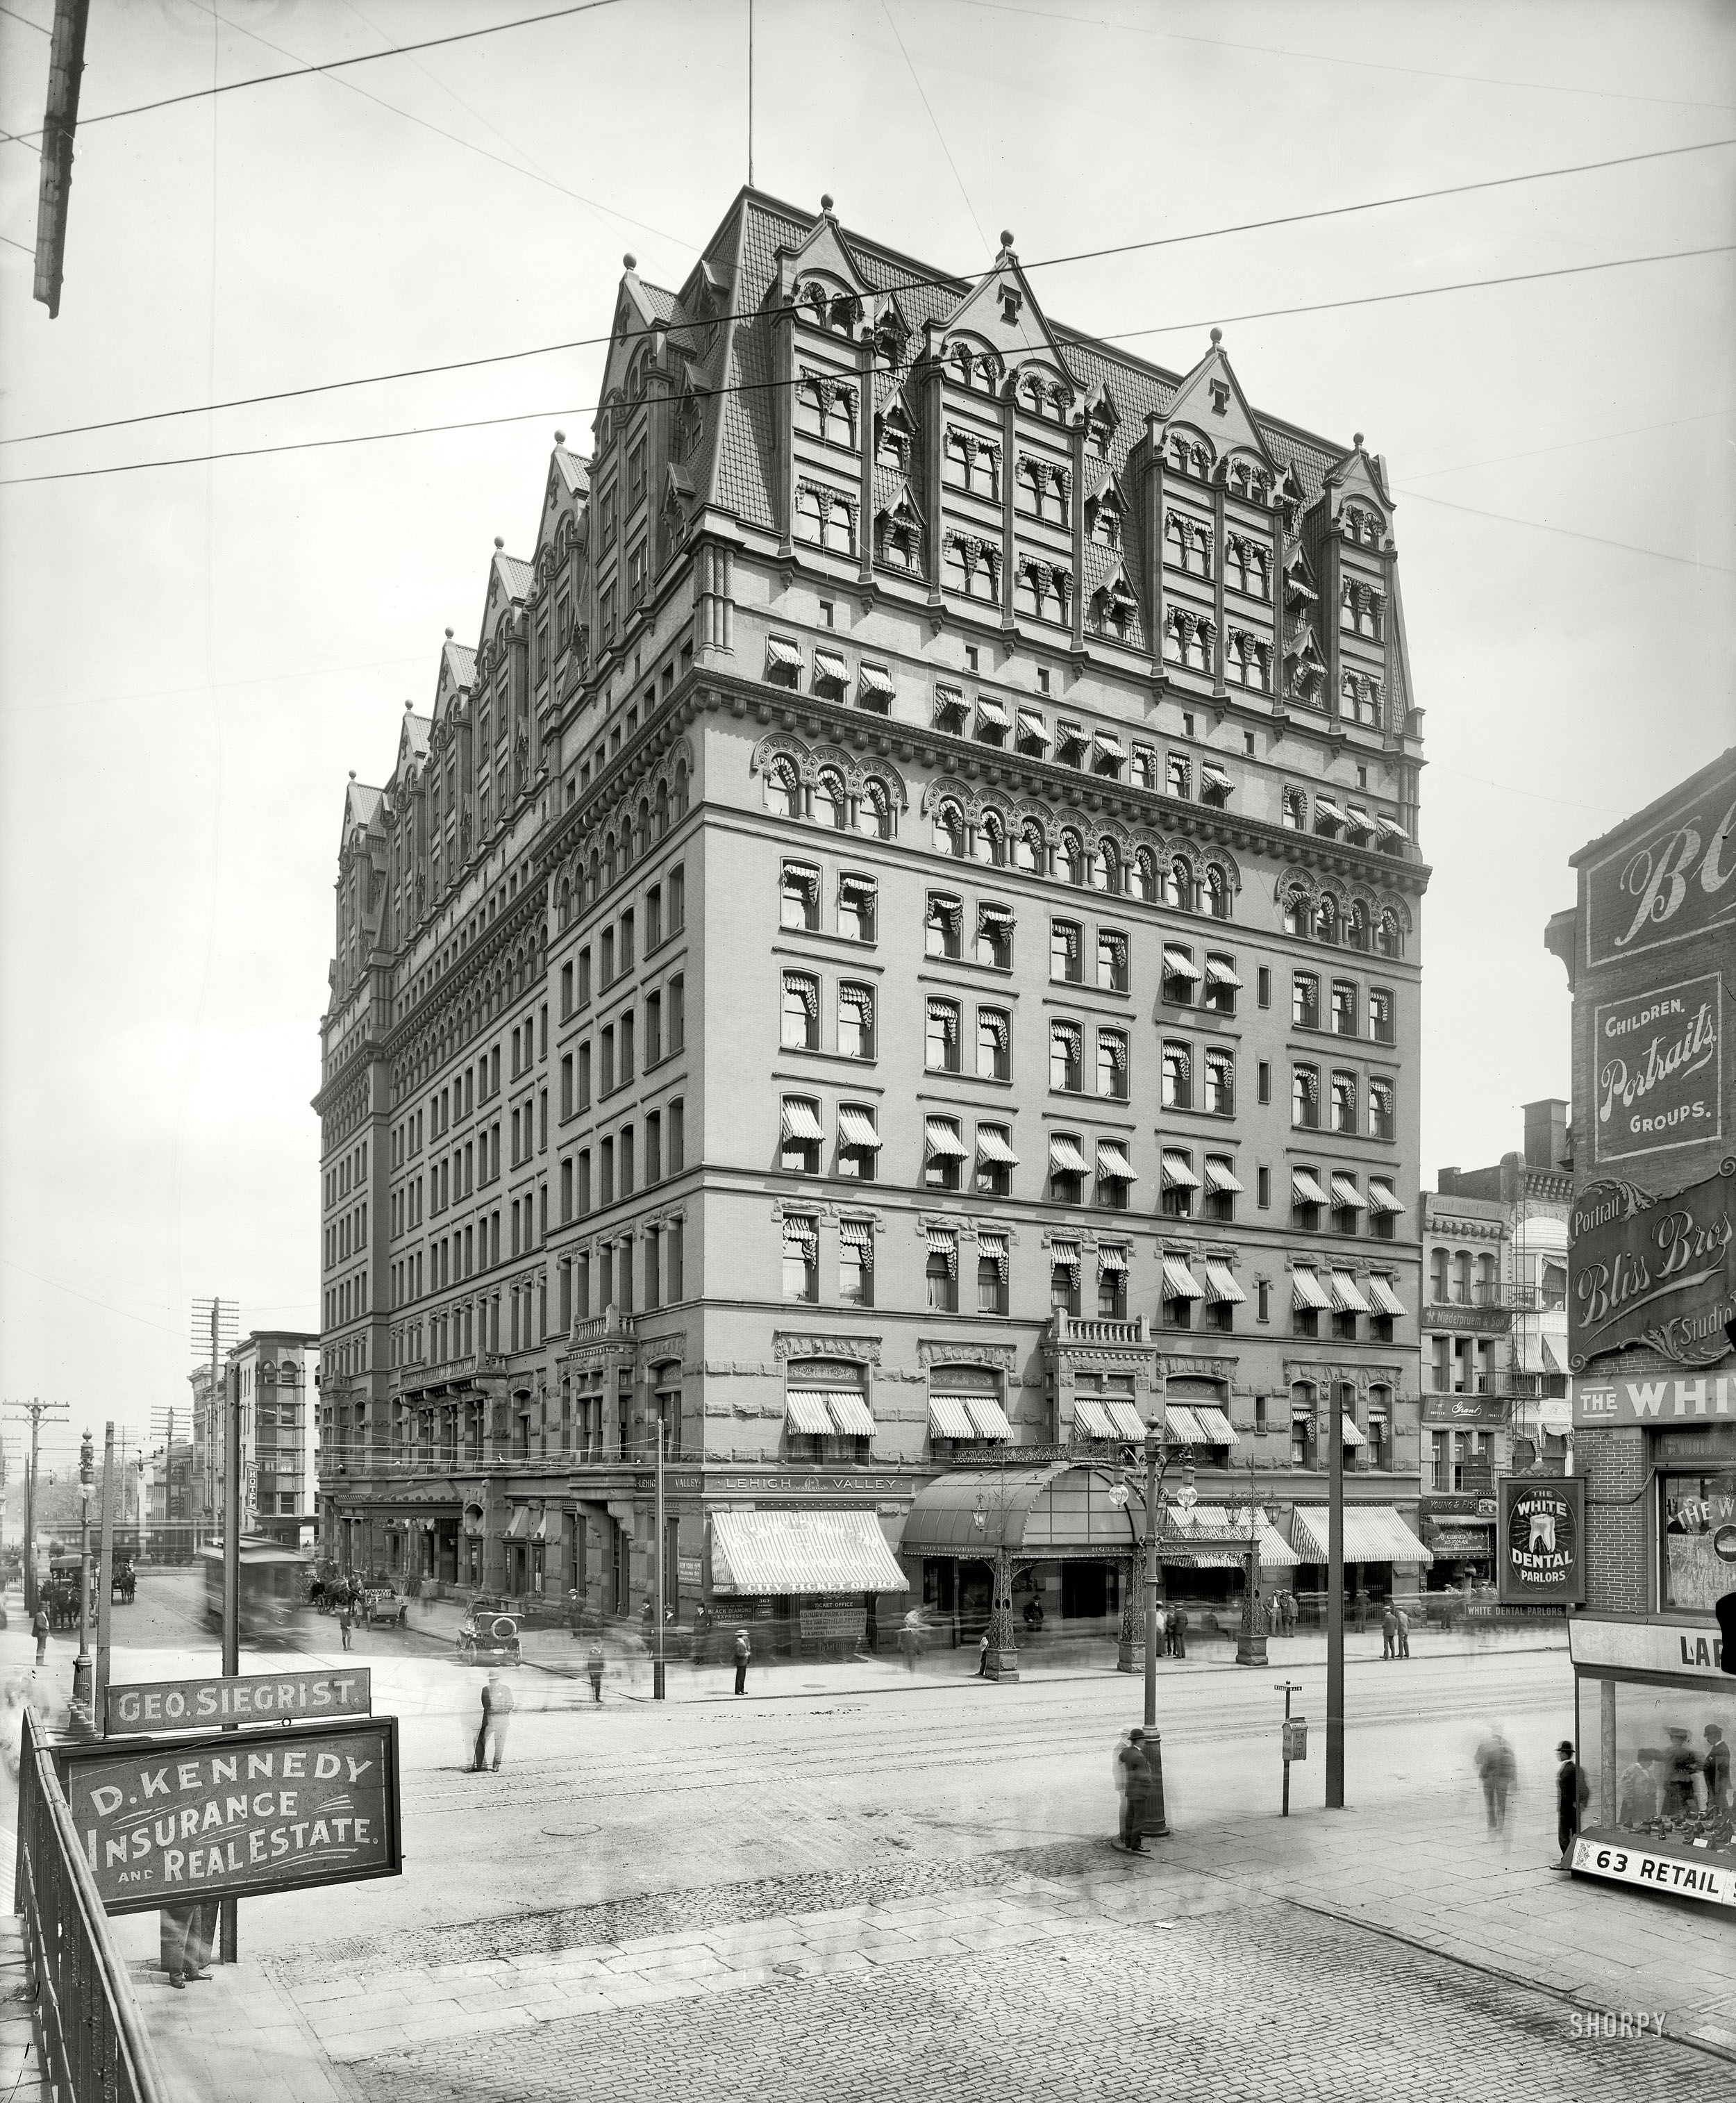 Buffalo, New York, circa 1905. "Hotel Iroquois." A nice selection of ghost pedestrians in this time exposure. Detroit Publishing Co. View full size.